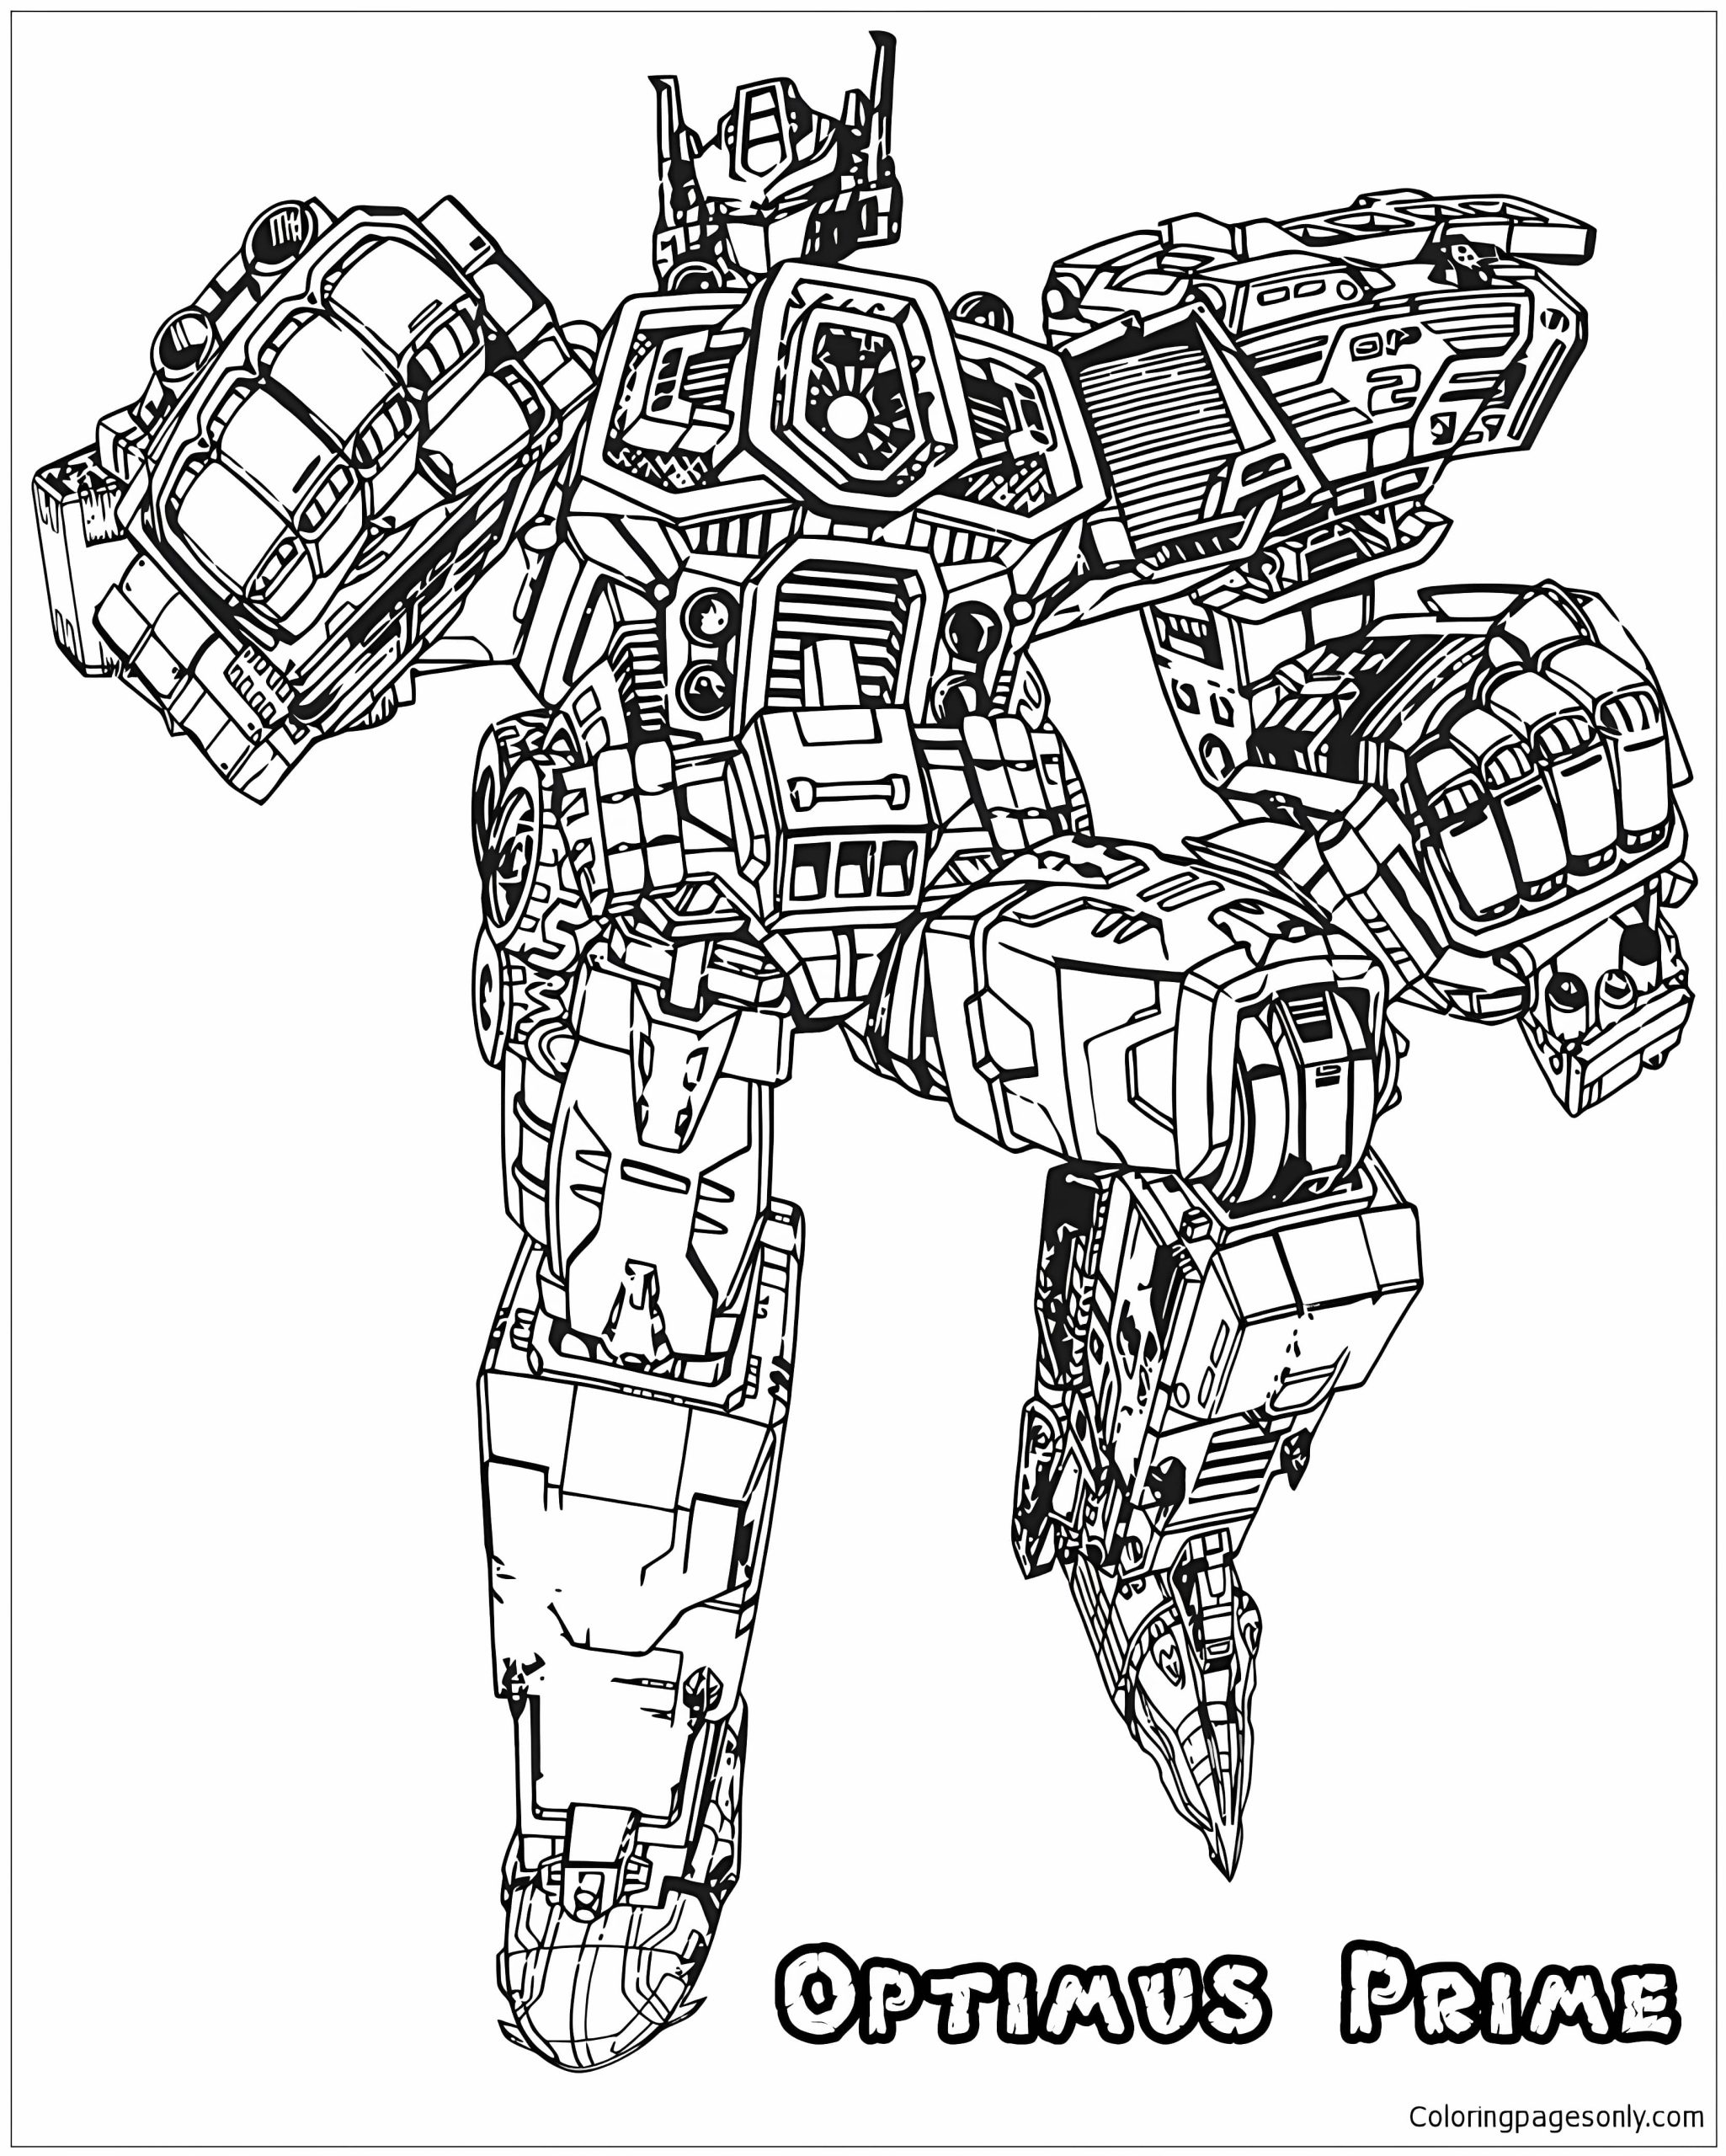 Optimus Prime – image 1 Coloring Pages